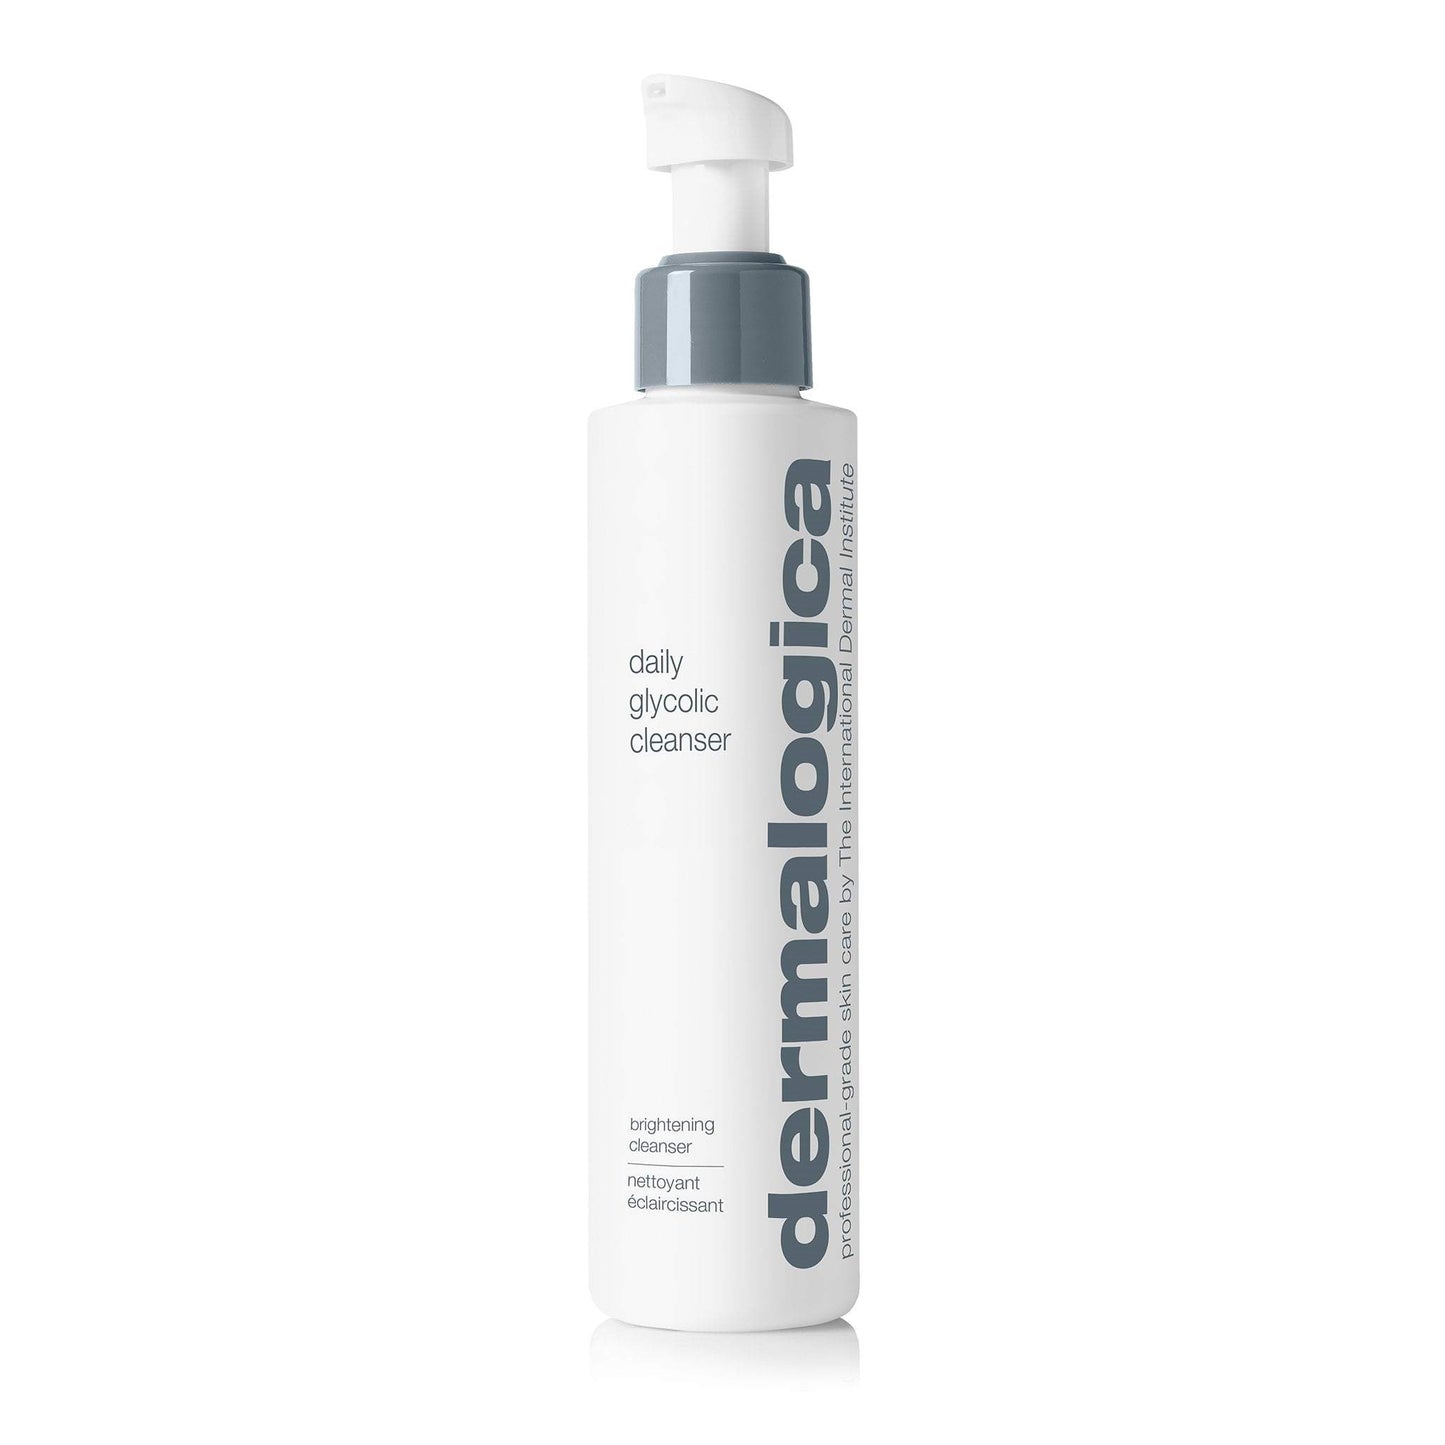 Dermalogica Daily Glycolic Cleanser - Heaven Therapy Skincare (7156826374304)